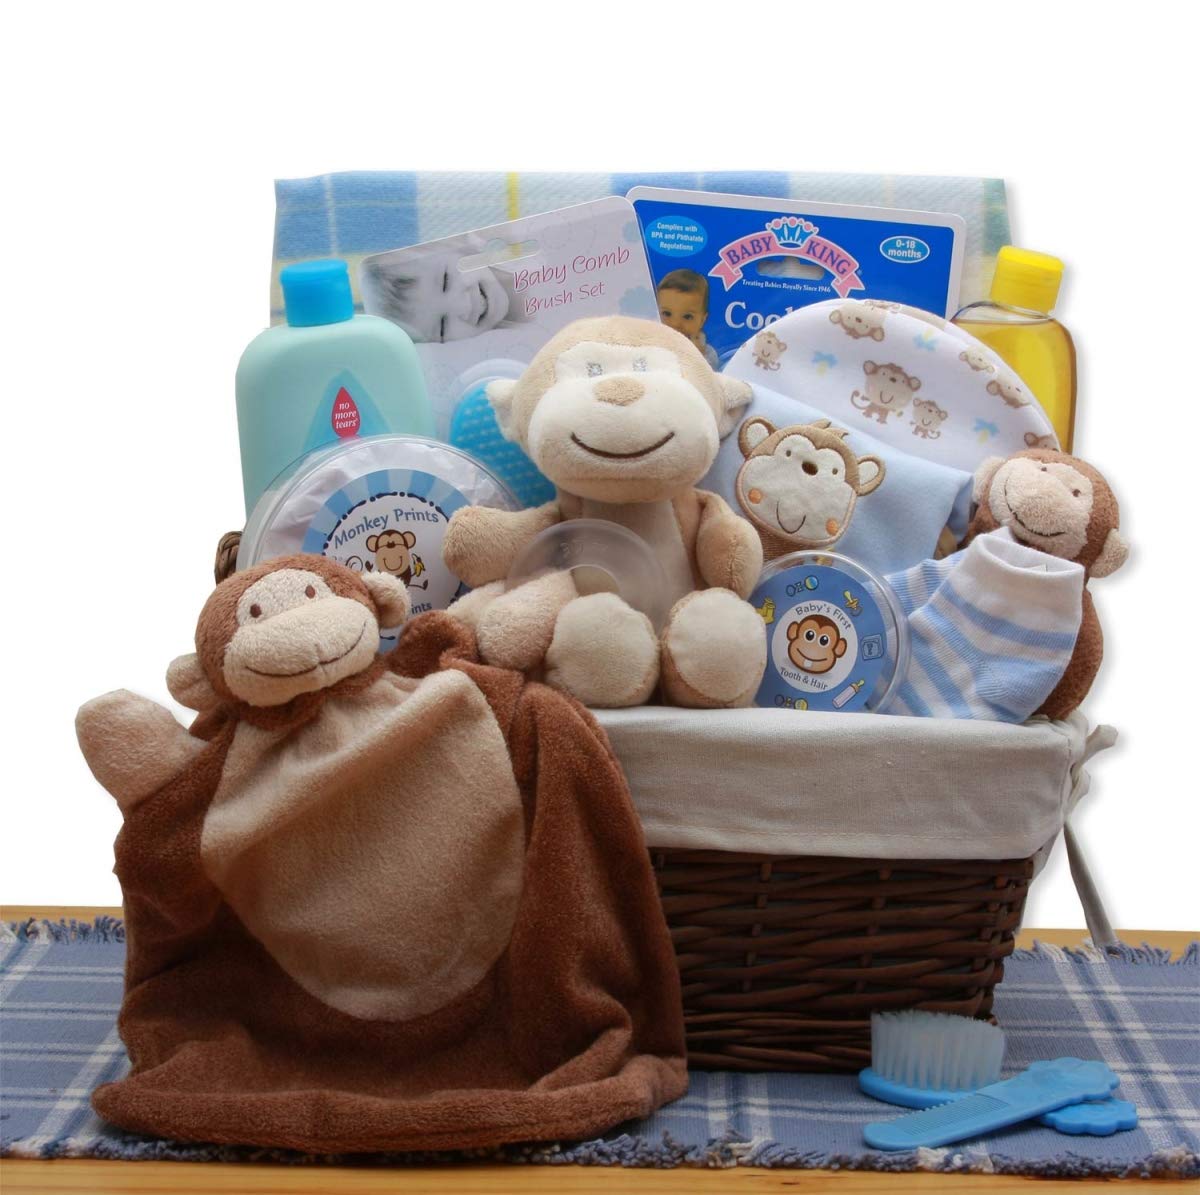 GBDS 890312-B A New Little Monkey New Baby Gift Basket - Blue